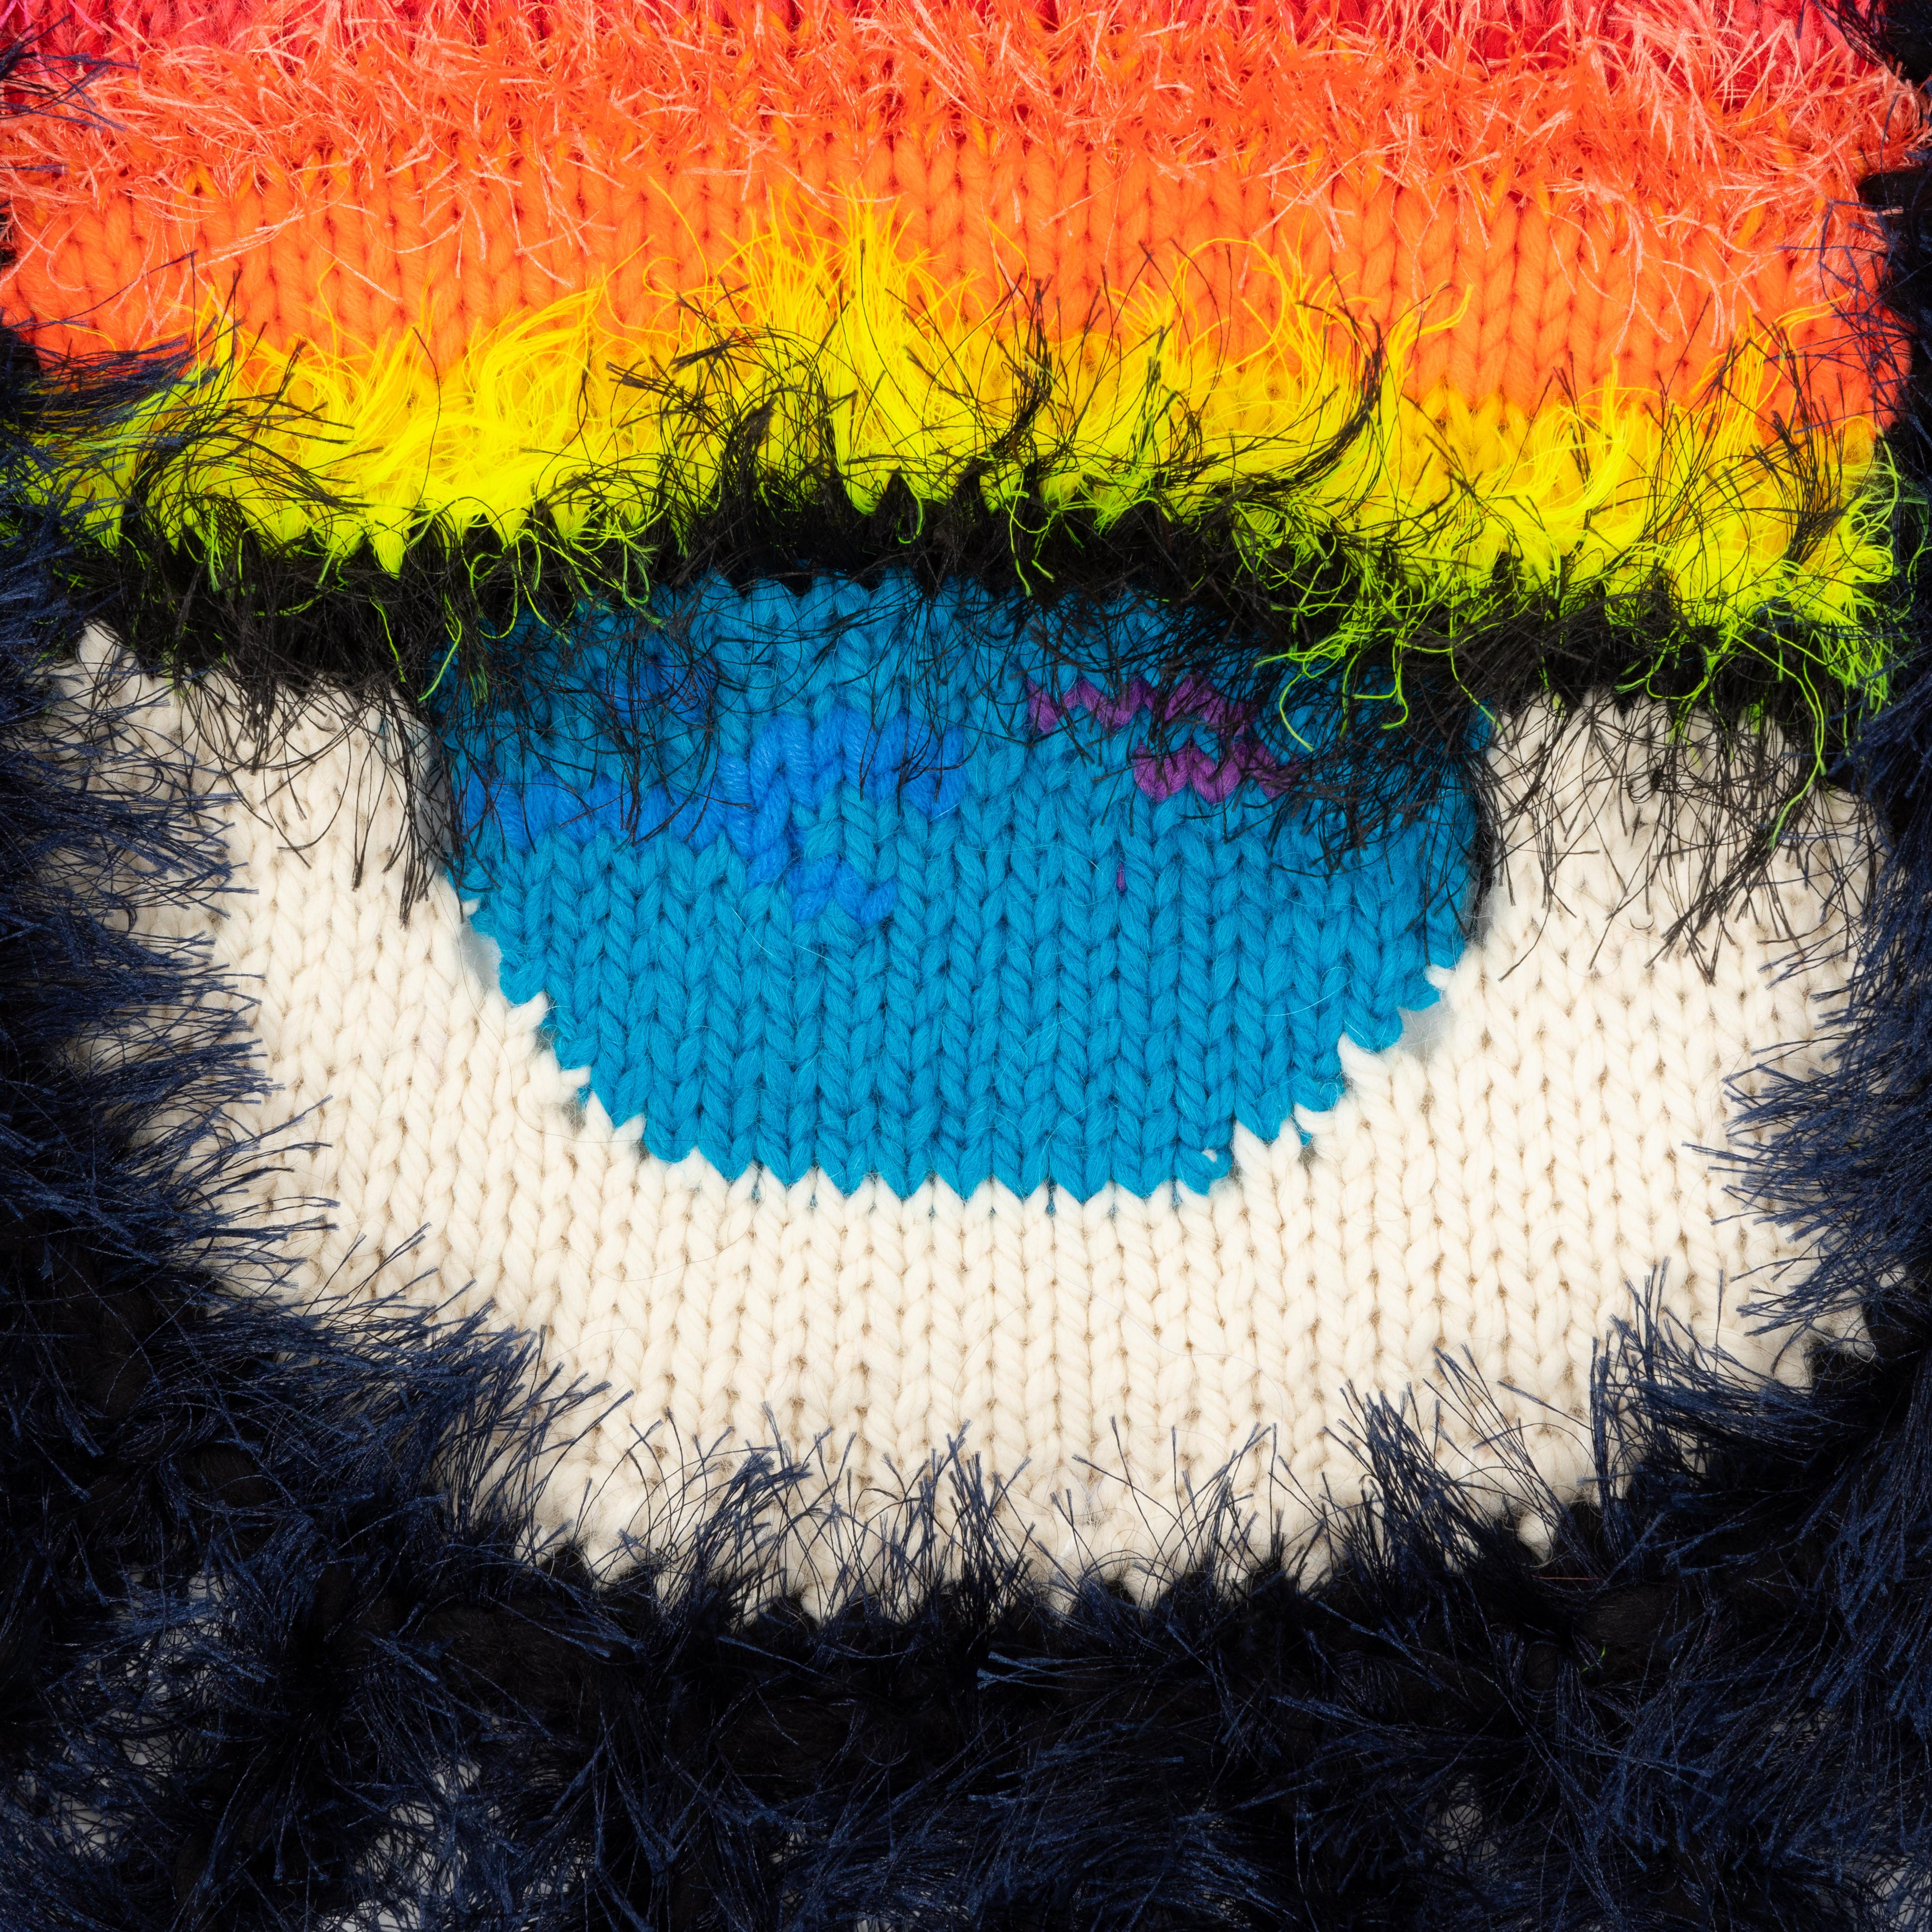 Textile Art, Hand-crafted, Knit and Crochet Art Blanket, Knitted Tapestry, Wall hanging.
A pair of non-identical multicoloured Psychedelic eyes, the owner has the freedom to display in whichever way they wish to create their own character on their